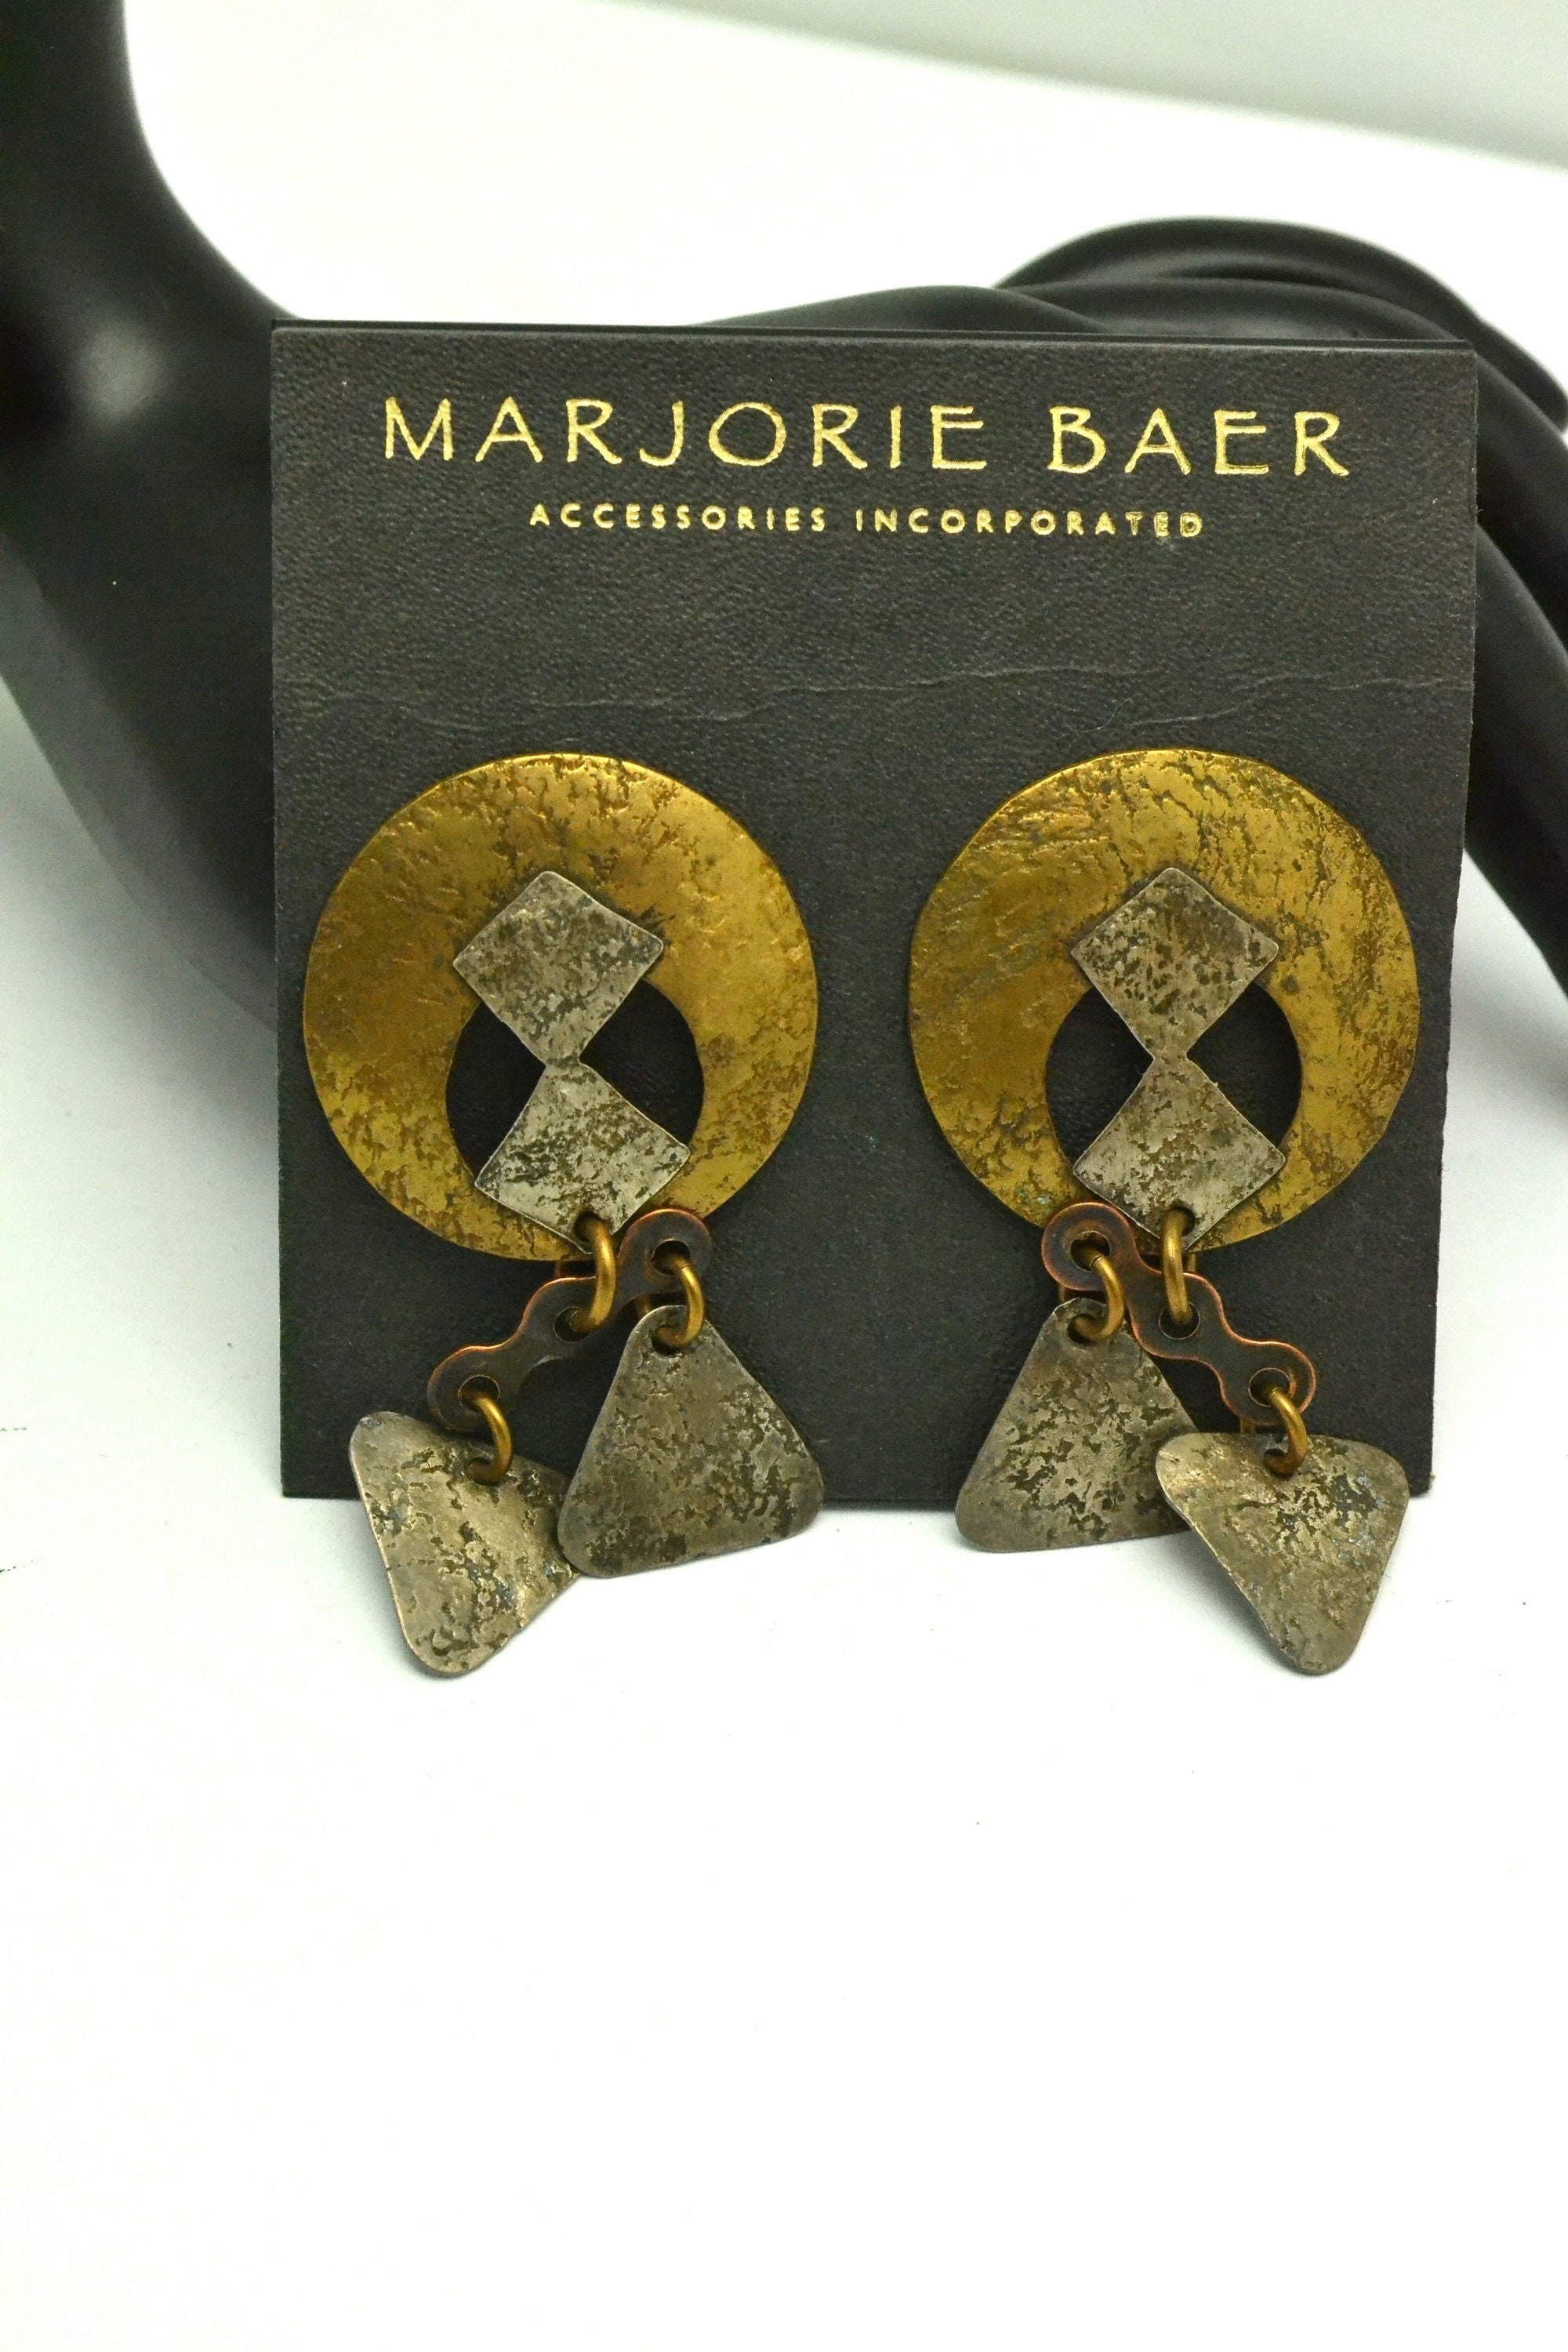 Marjorie Baer Square With Rings Drop Earrings at Von Maur